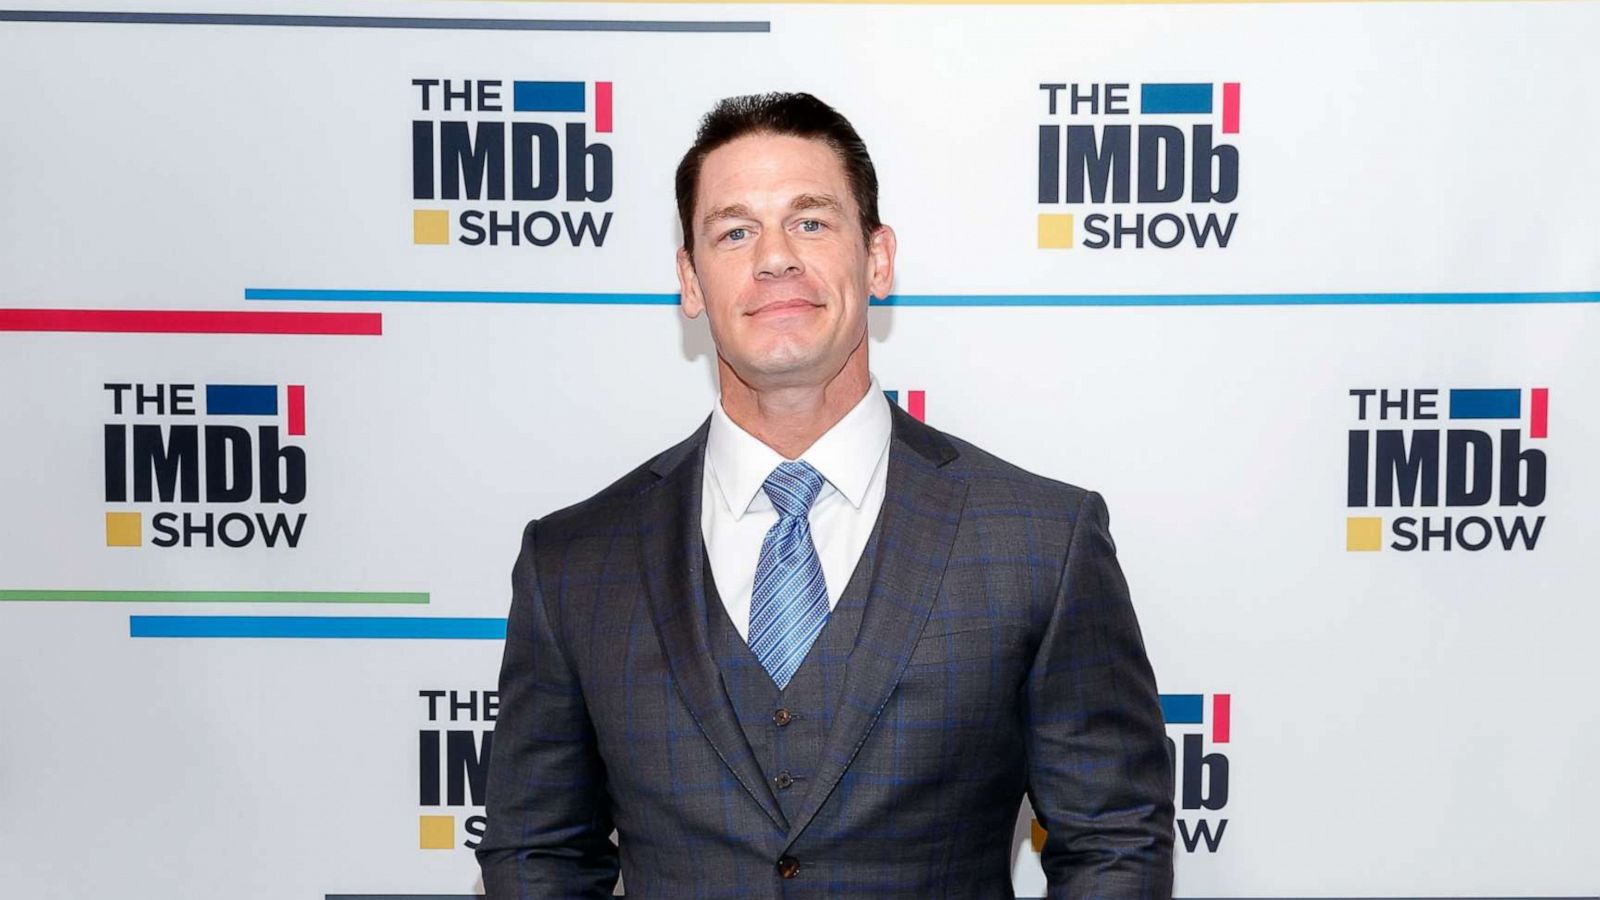 Checked Cena's IMDB. Surprise we haven't heard much about this